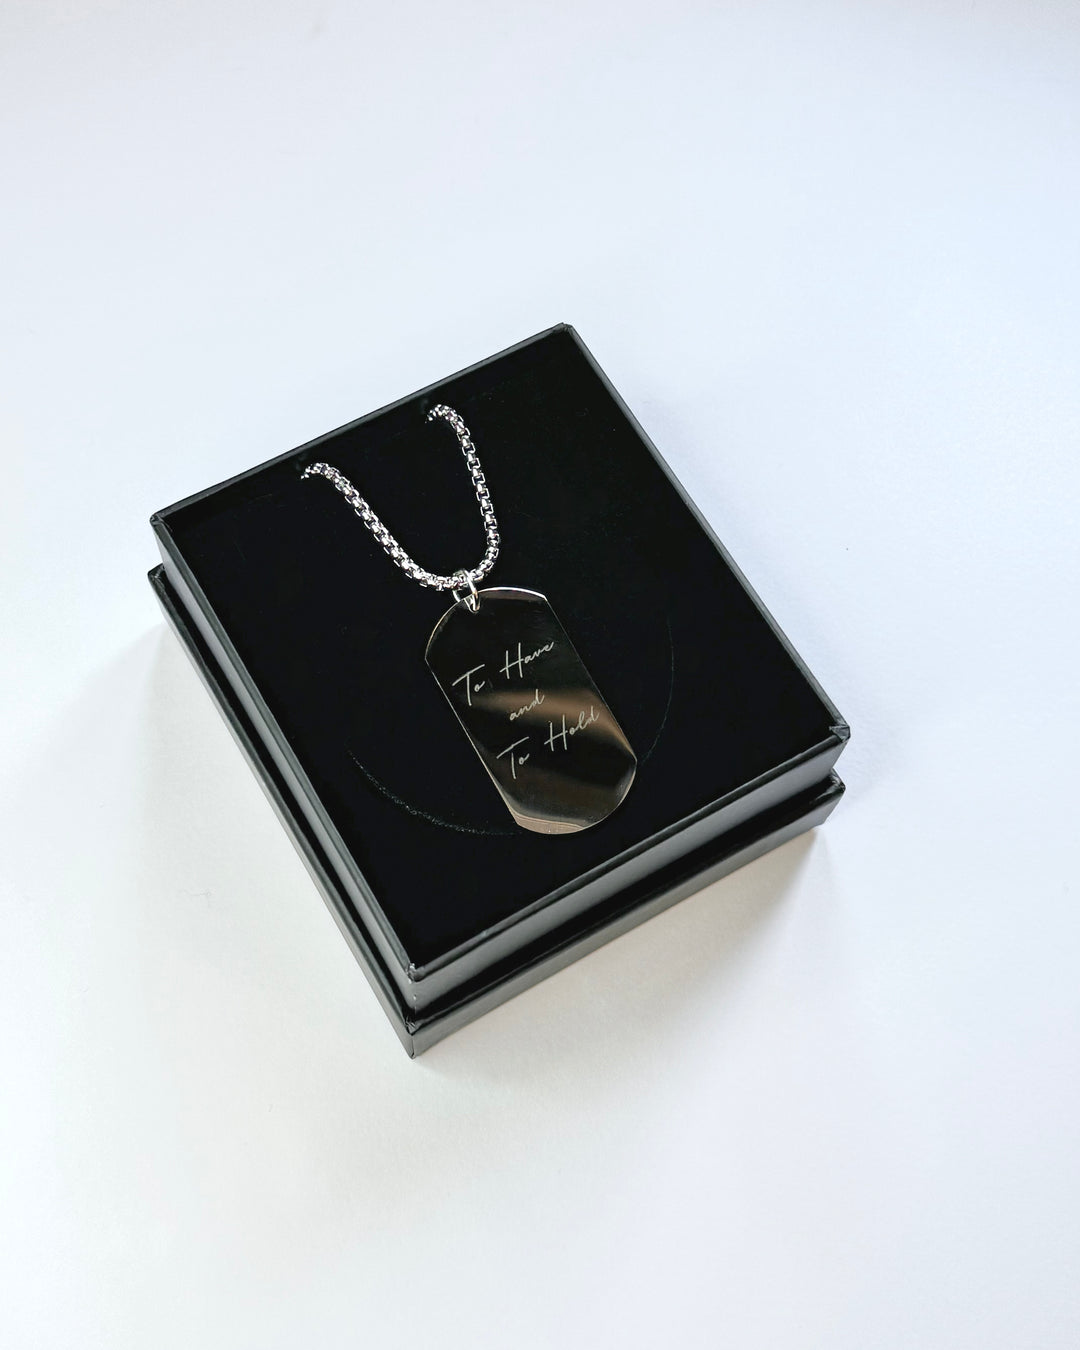 Tag Necklace